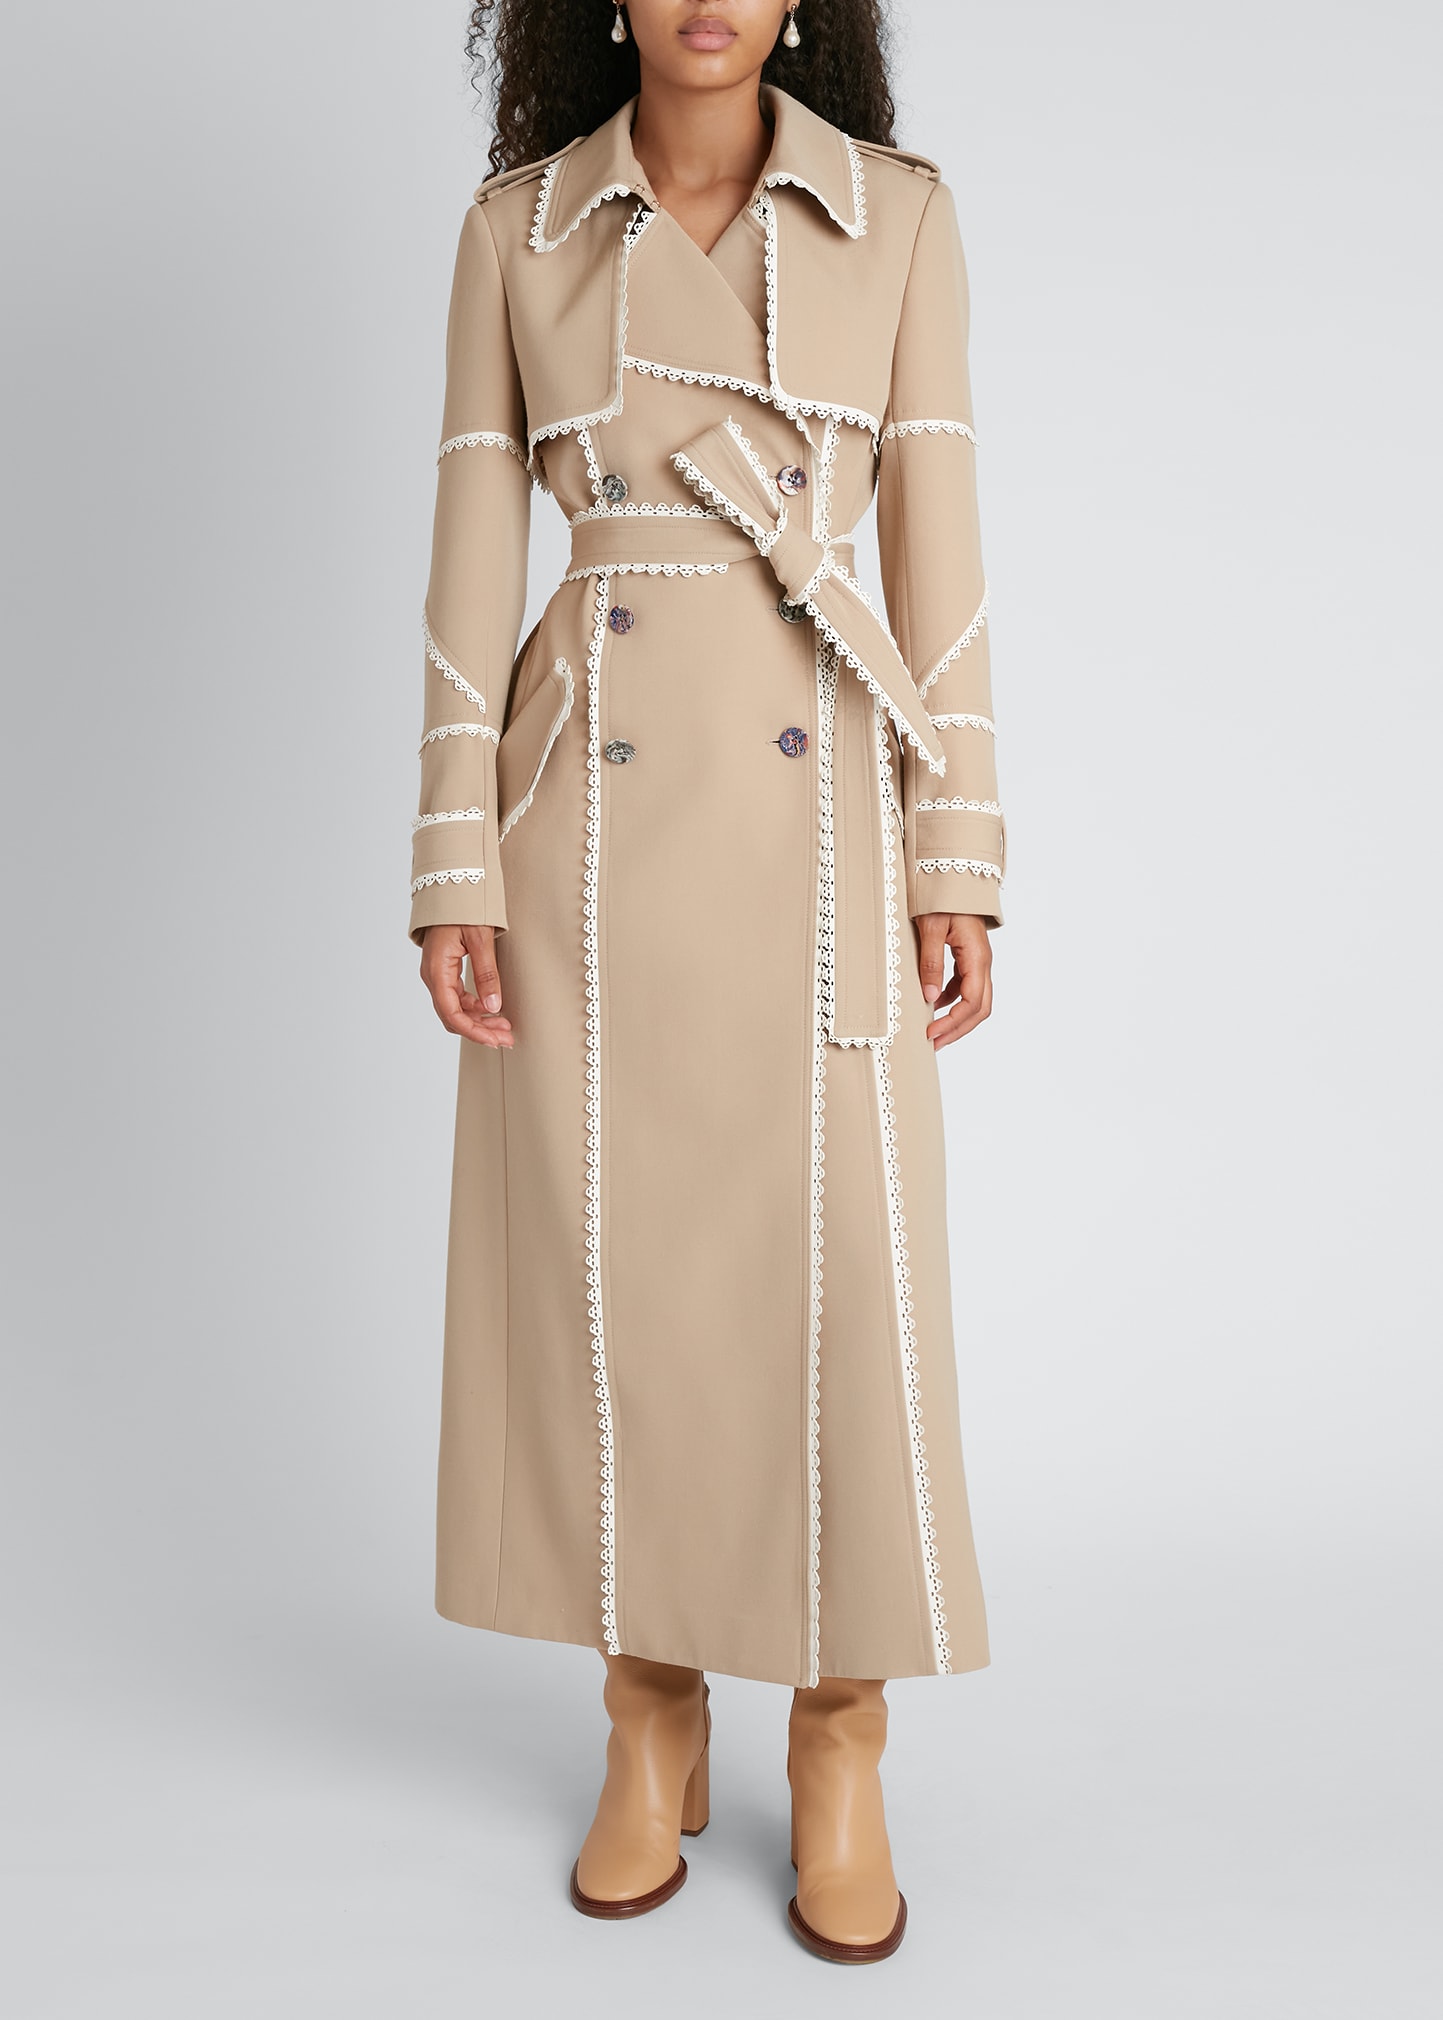 Double-Breasted Belted Trench w/ Scalloped Leather Ribbons | Bergdorf Goodman